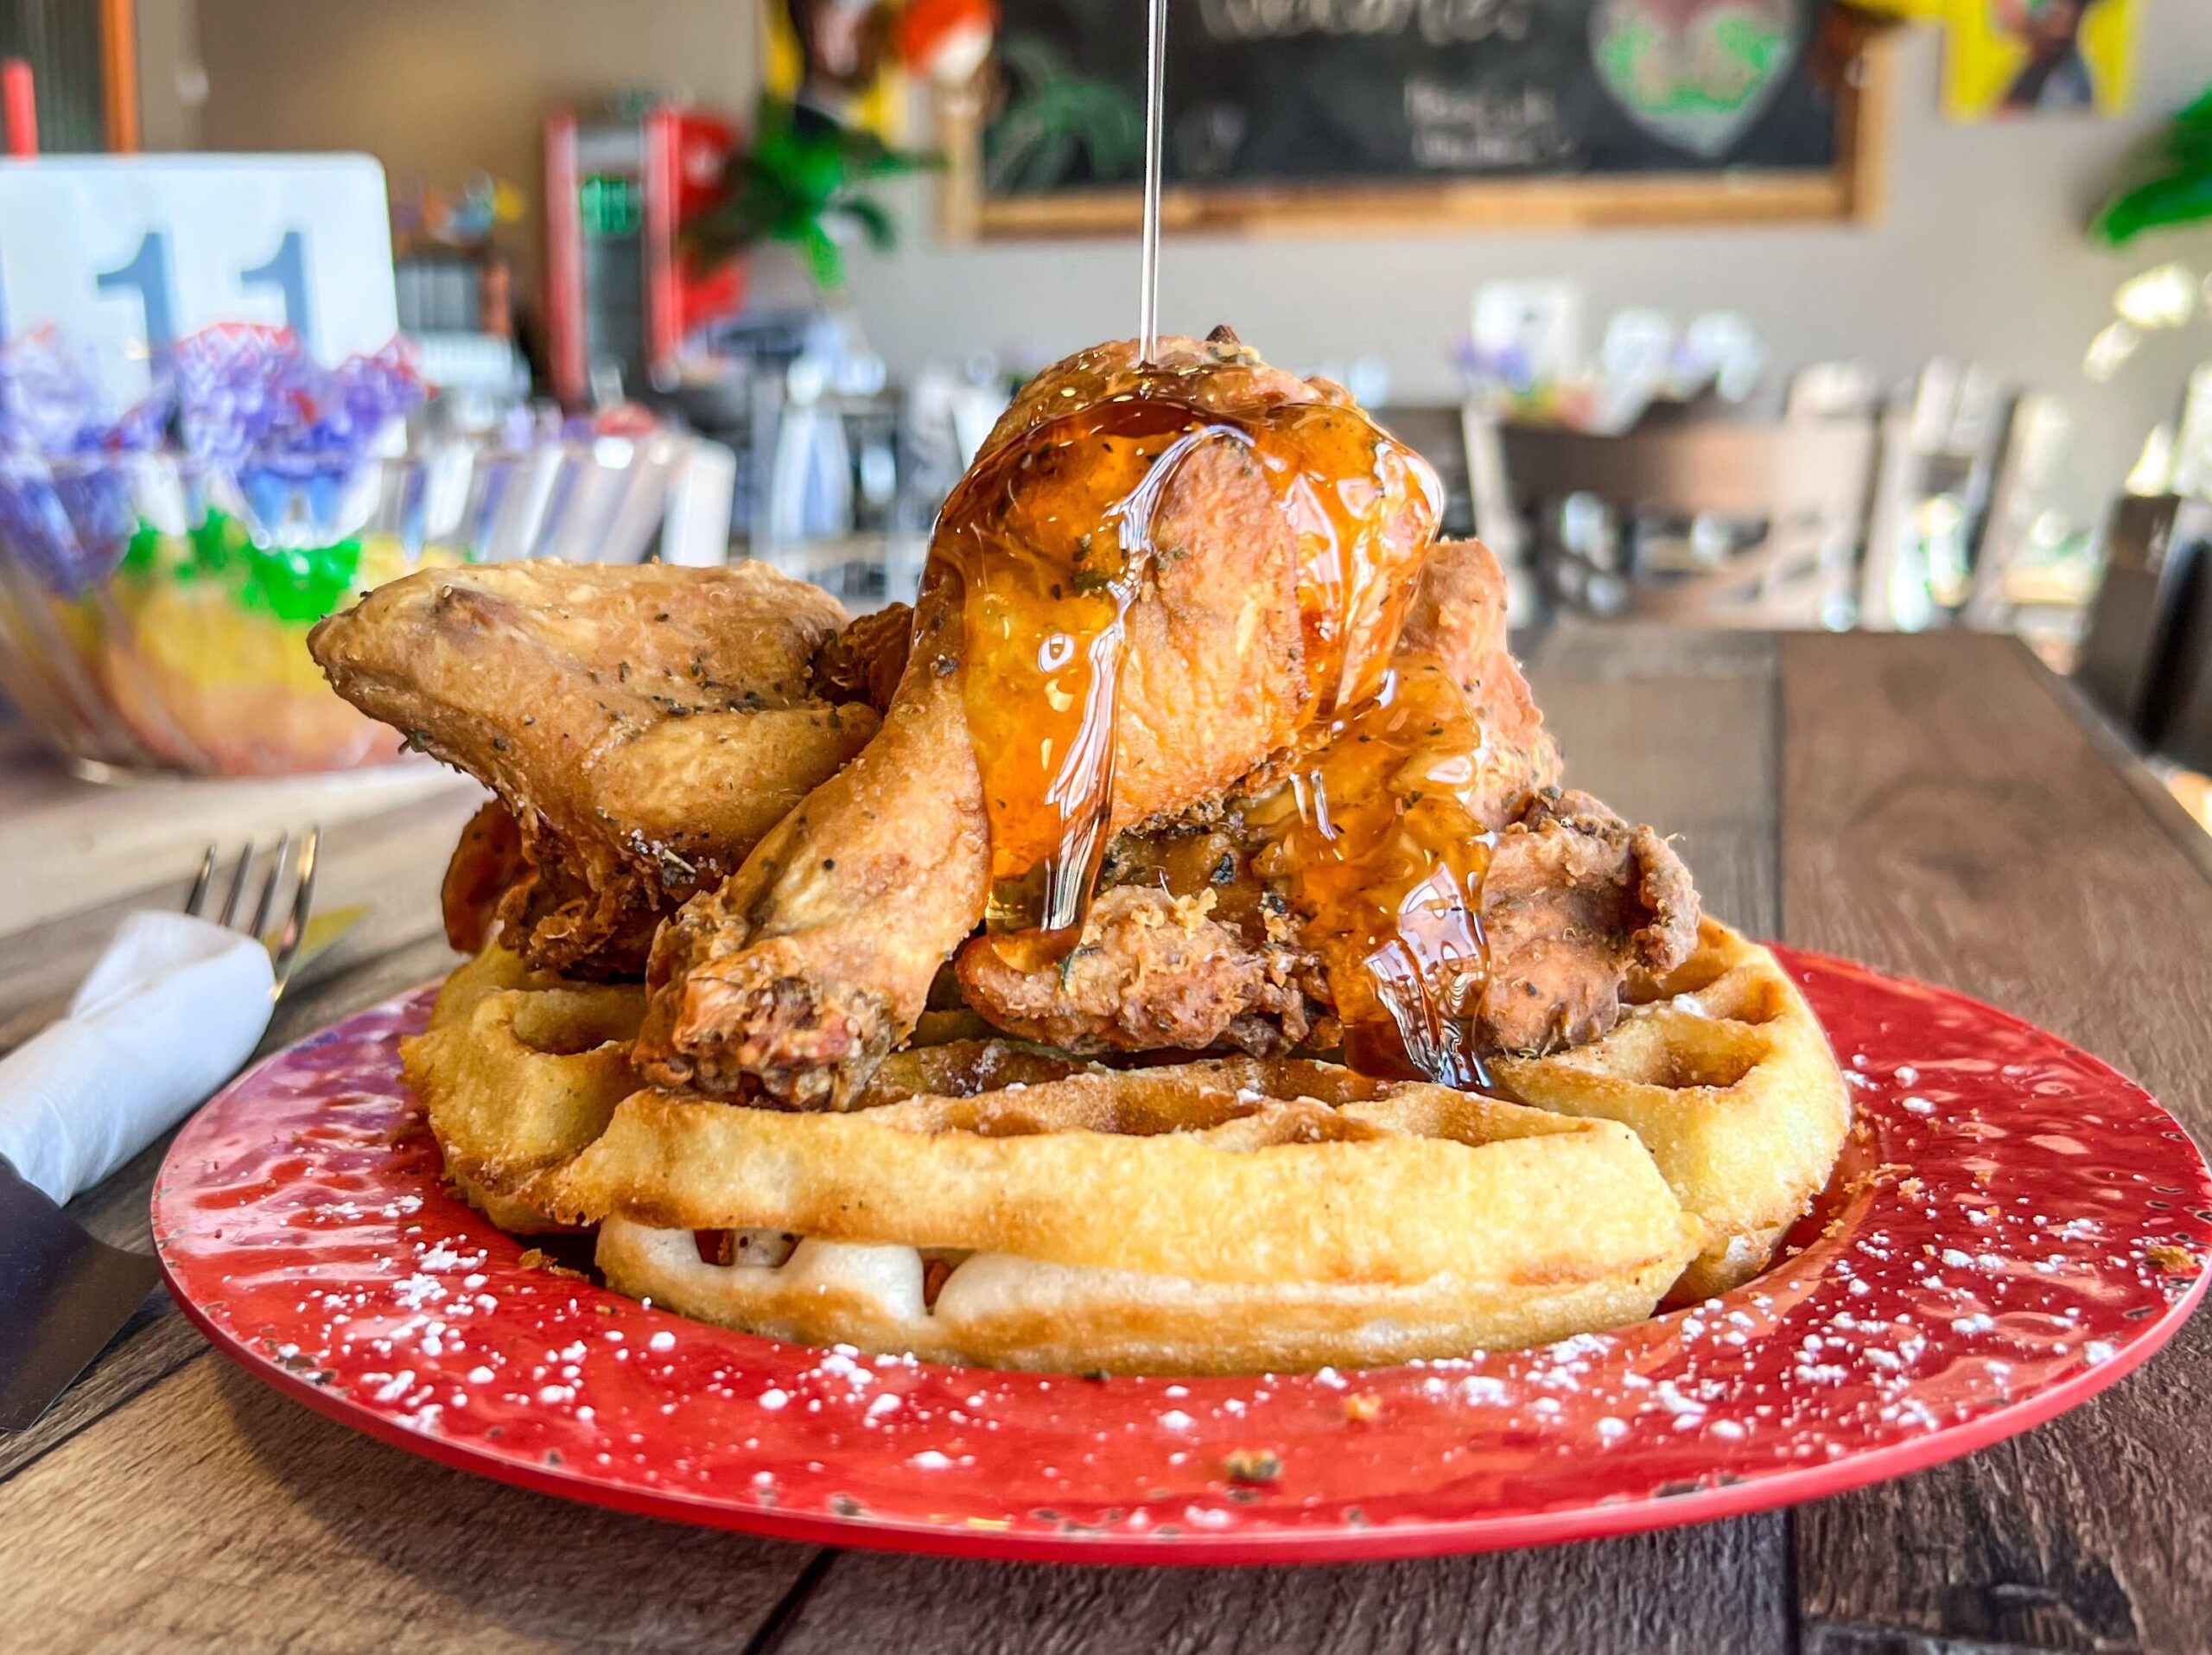 Chicken & Waffles from Janet & Rays